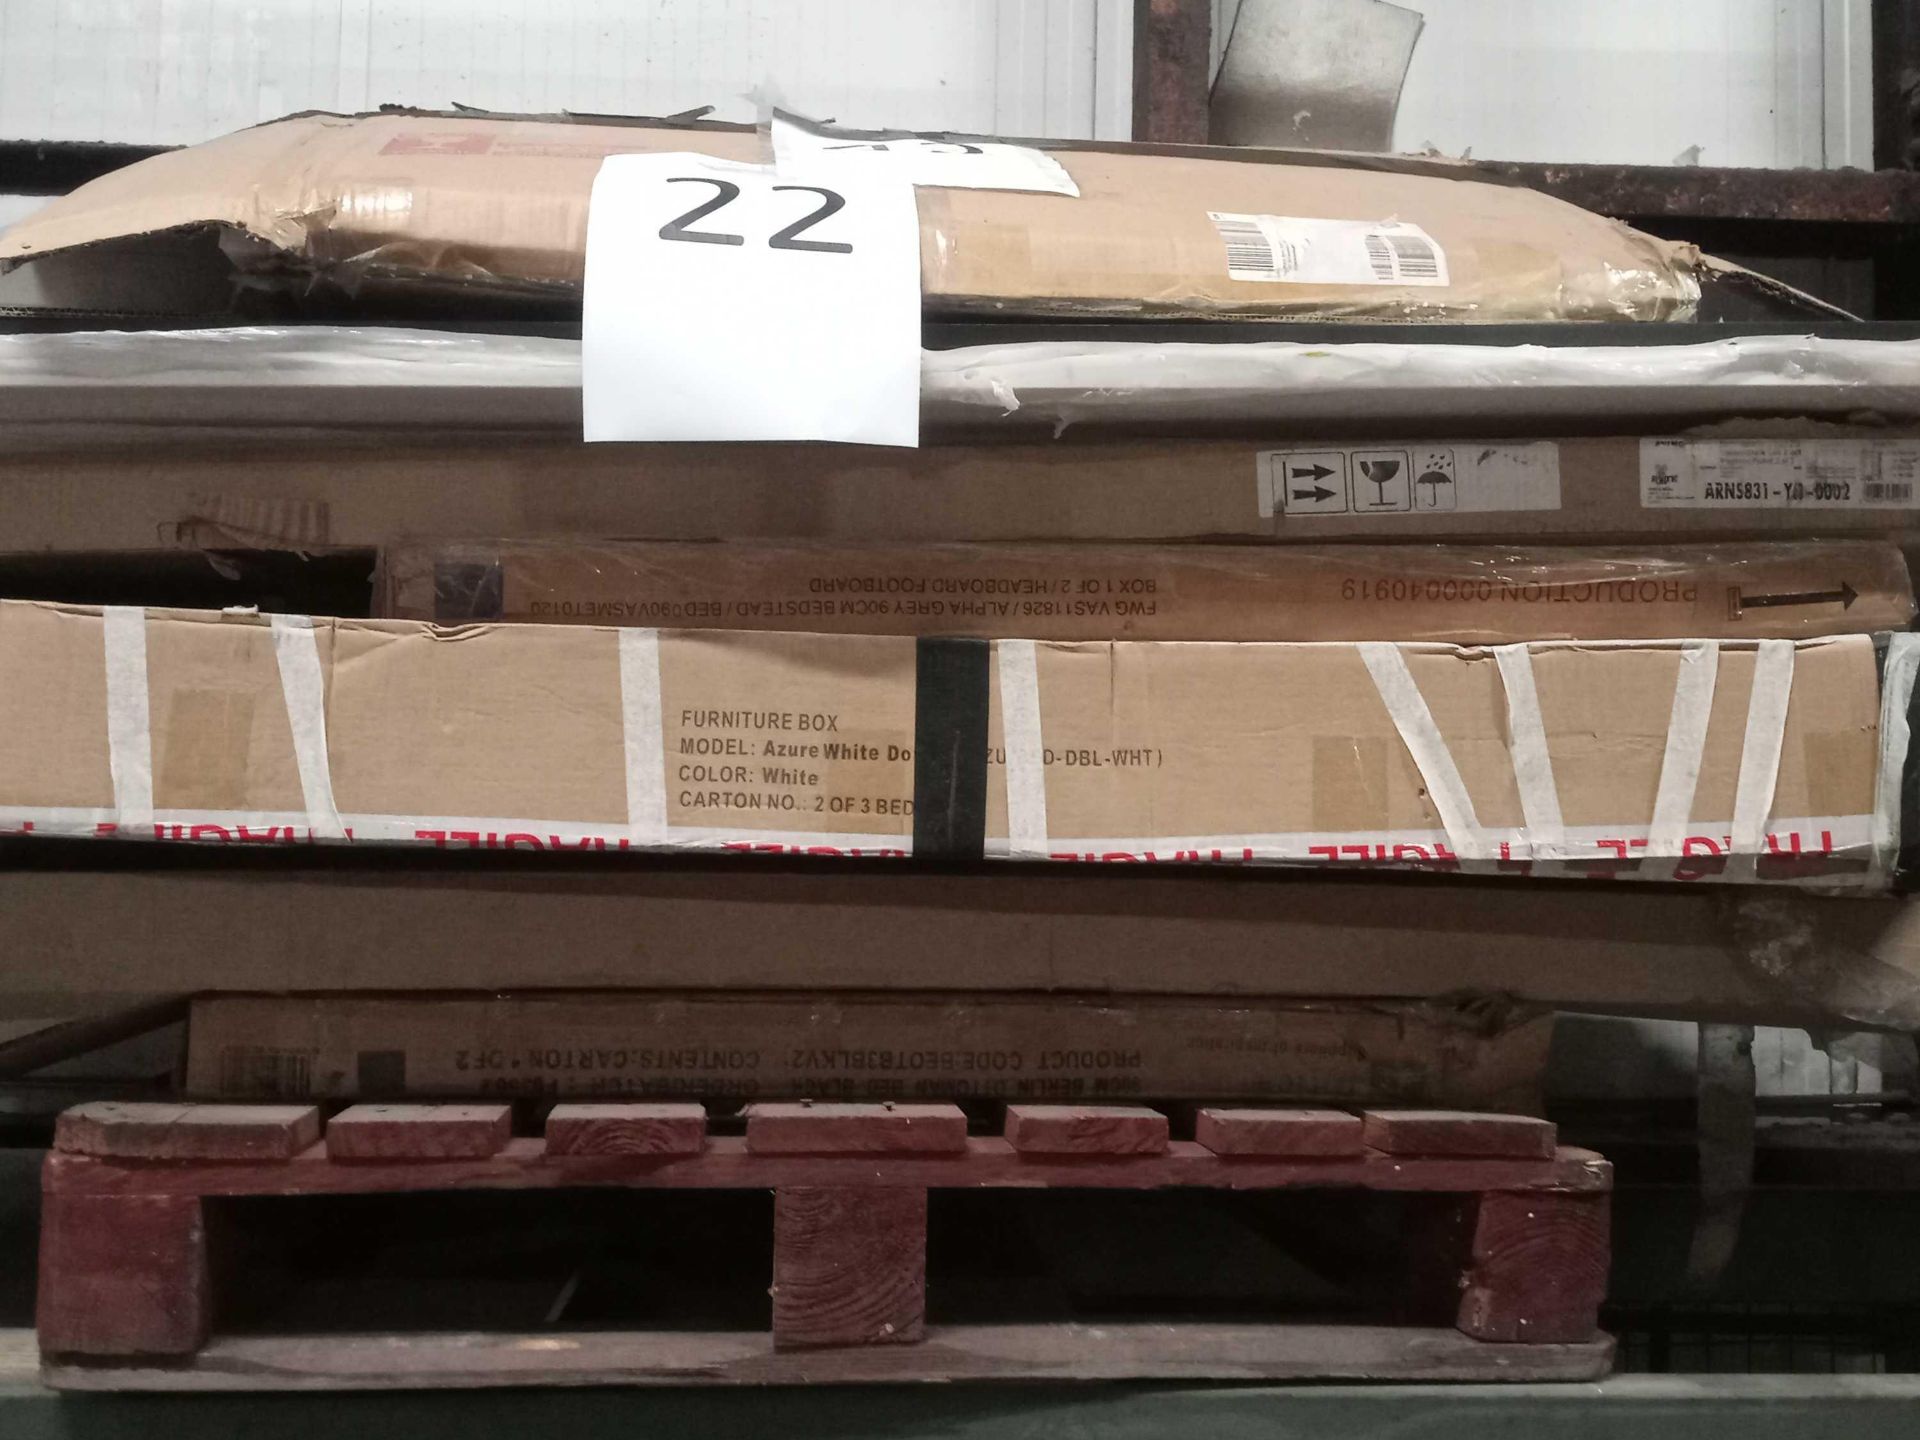 Pallet To Contain A Large Assortment Of Boxed Flatpacked Furniture Part Lots